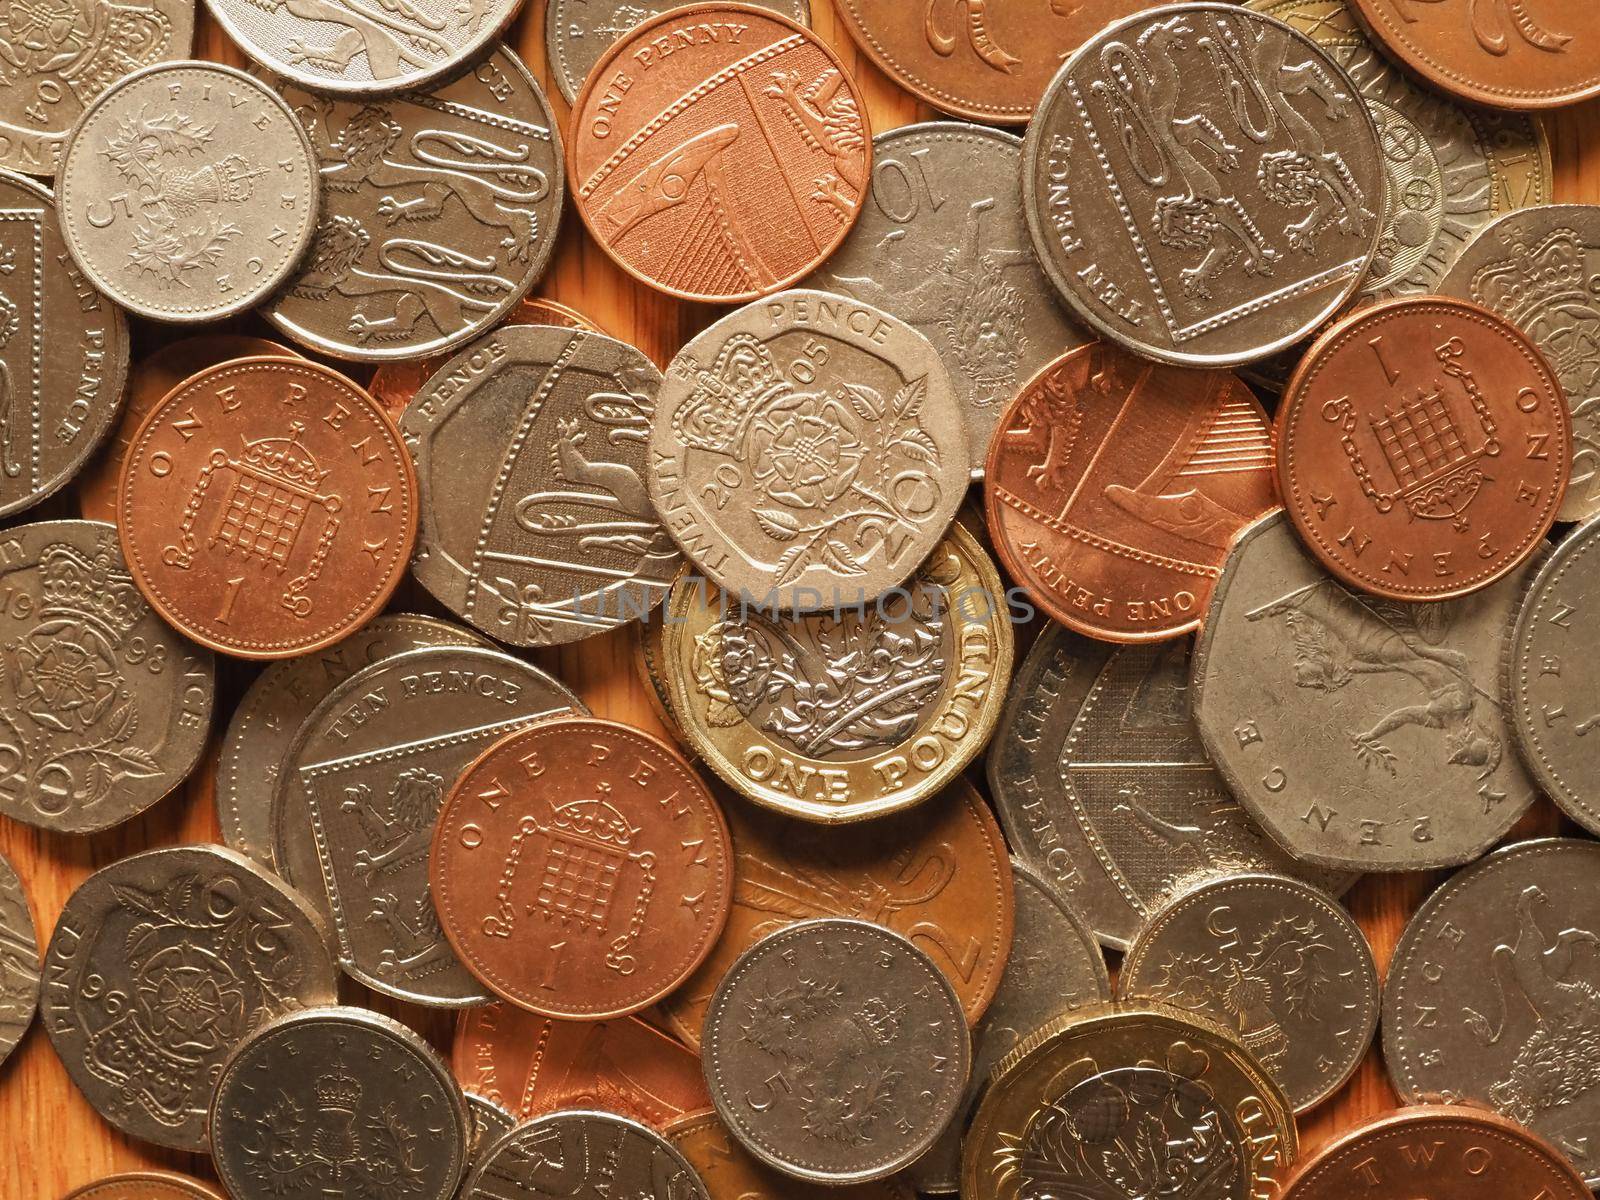 Pound coins money currency of United Kingdom